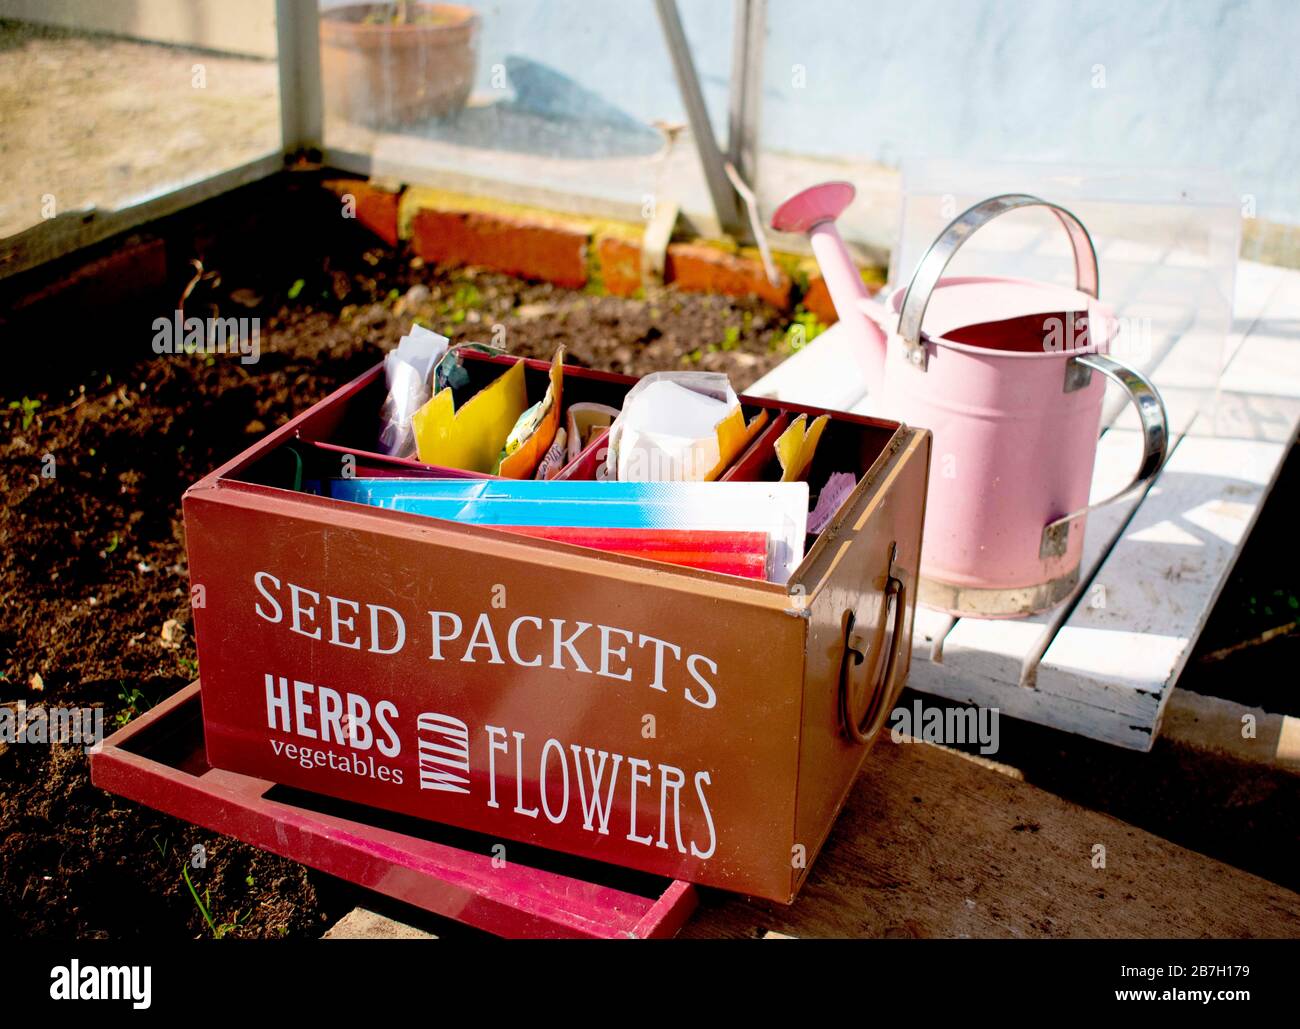 Grow you own food   seeds and  vegetables Stock Photo